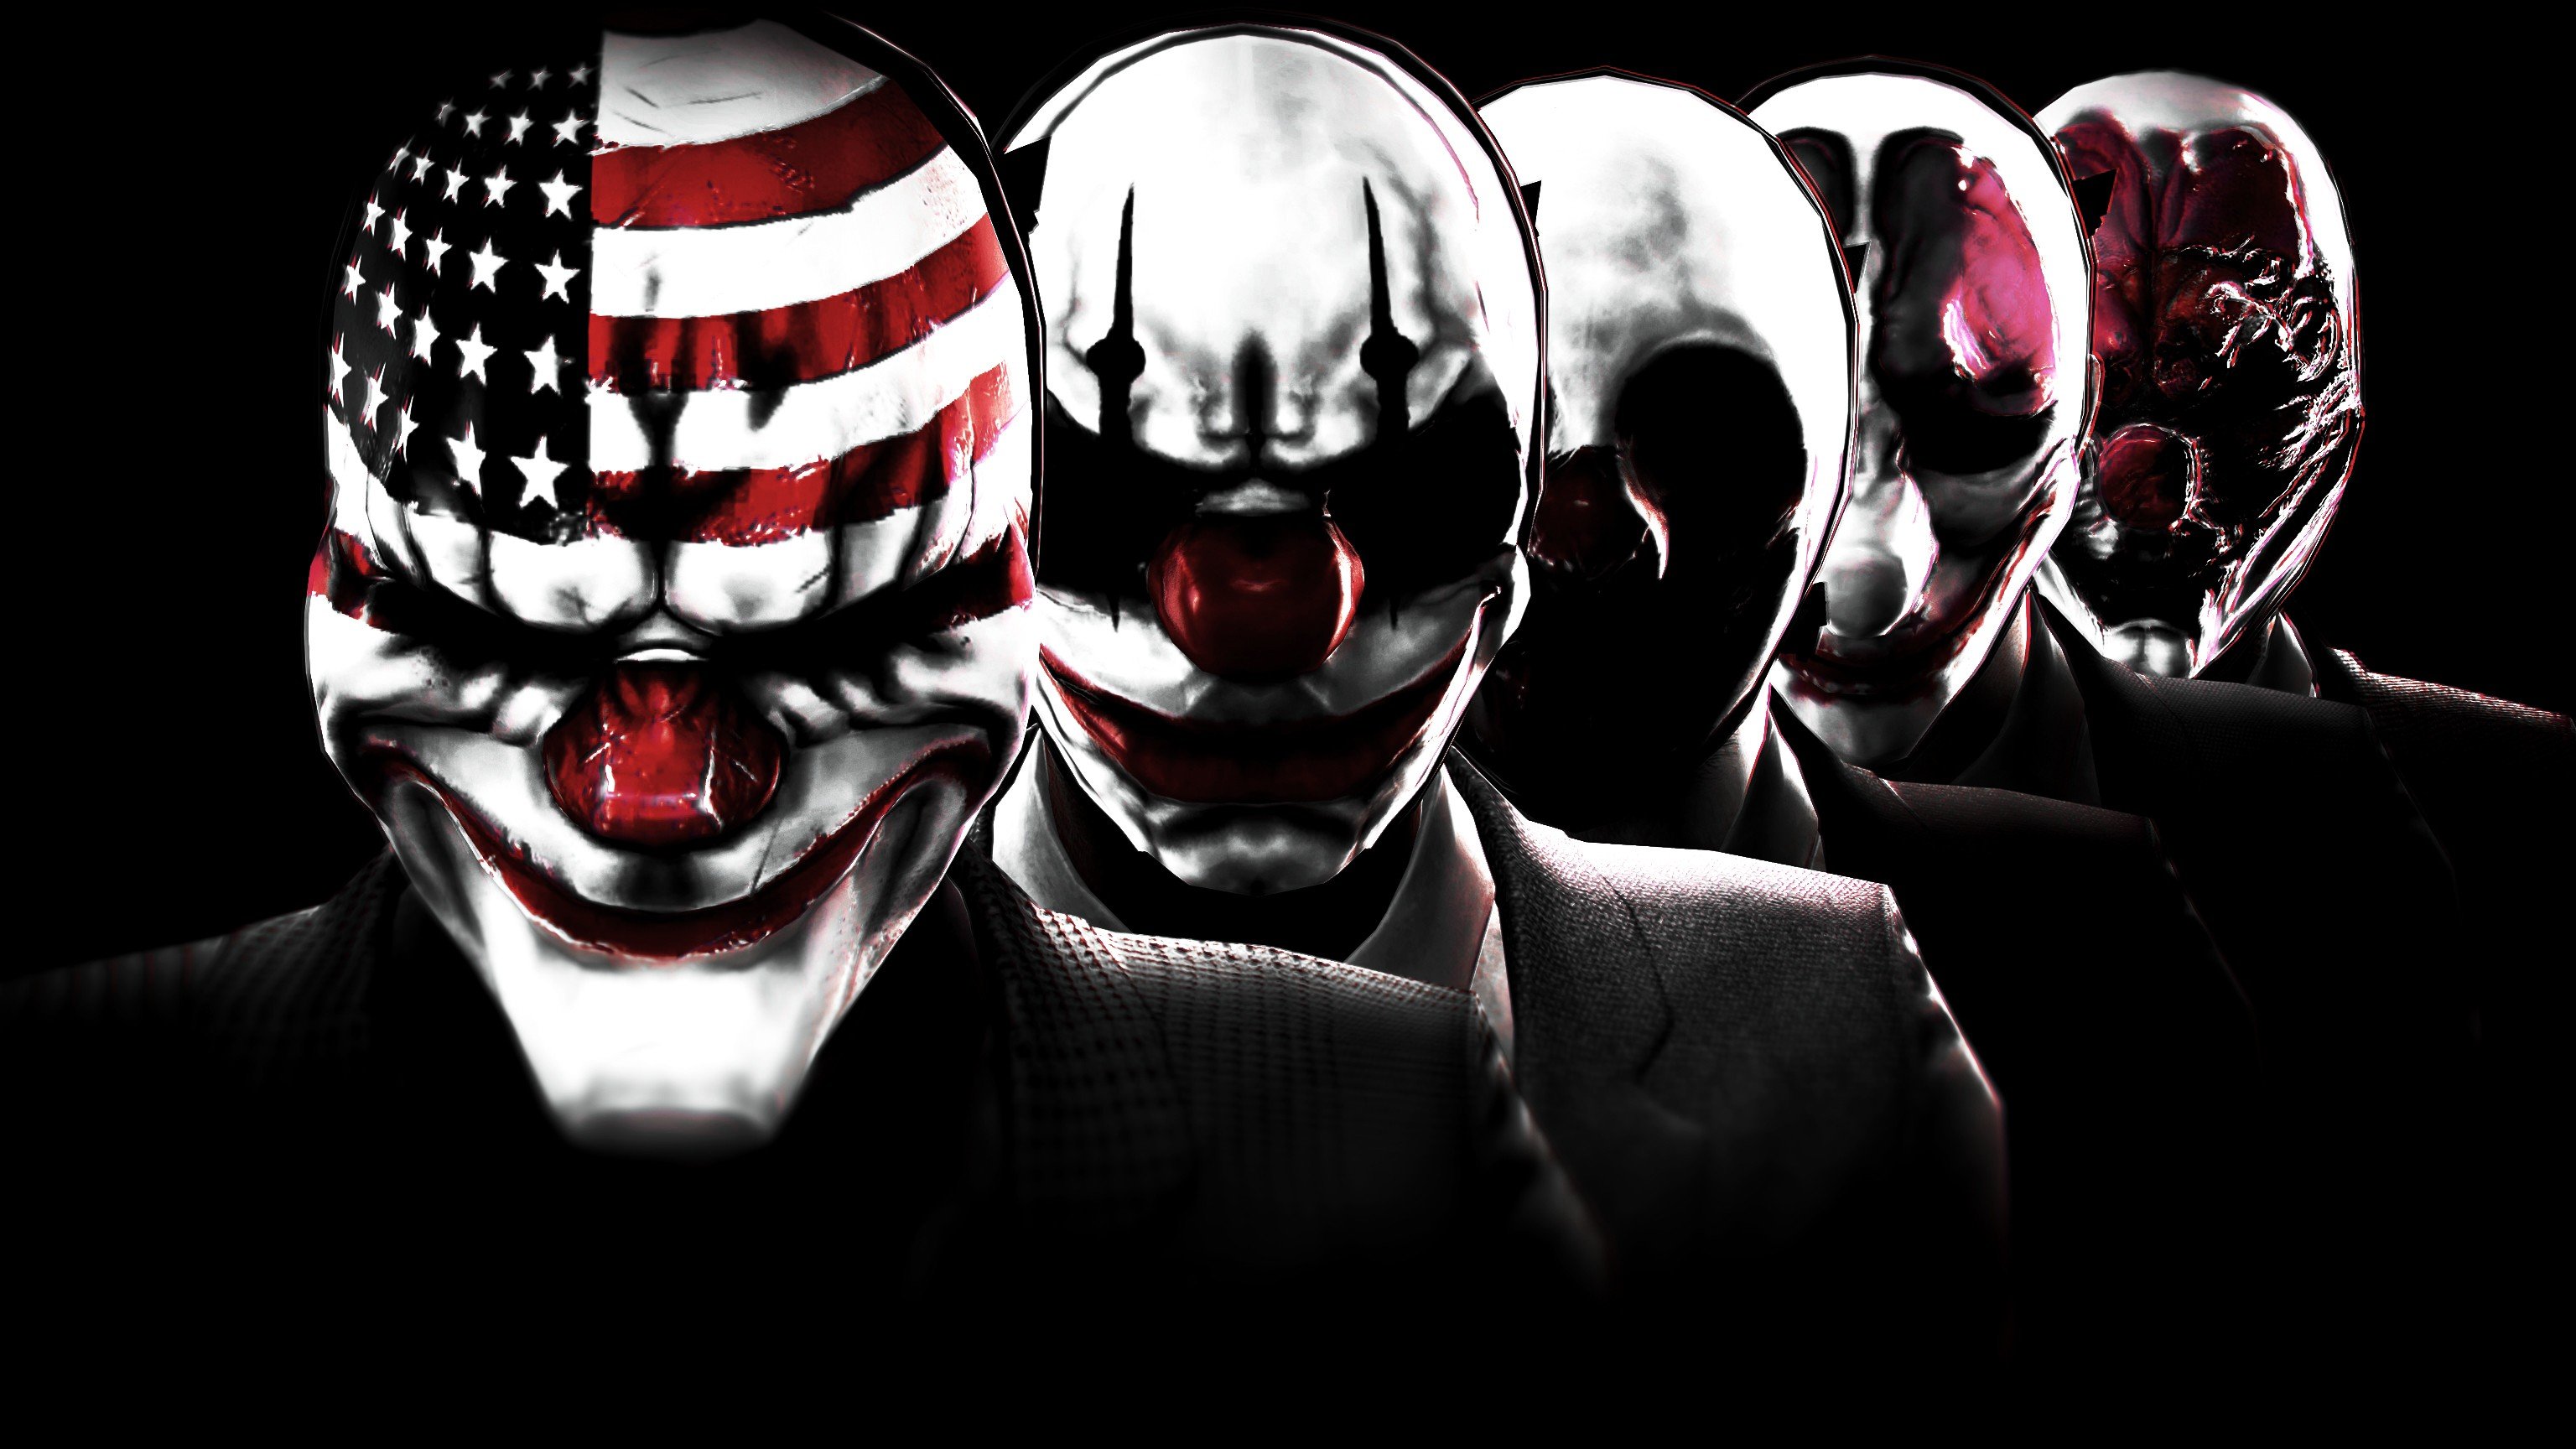 payday game play download free